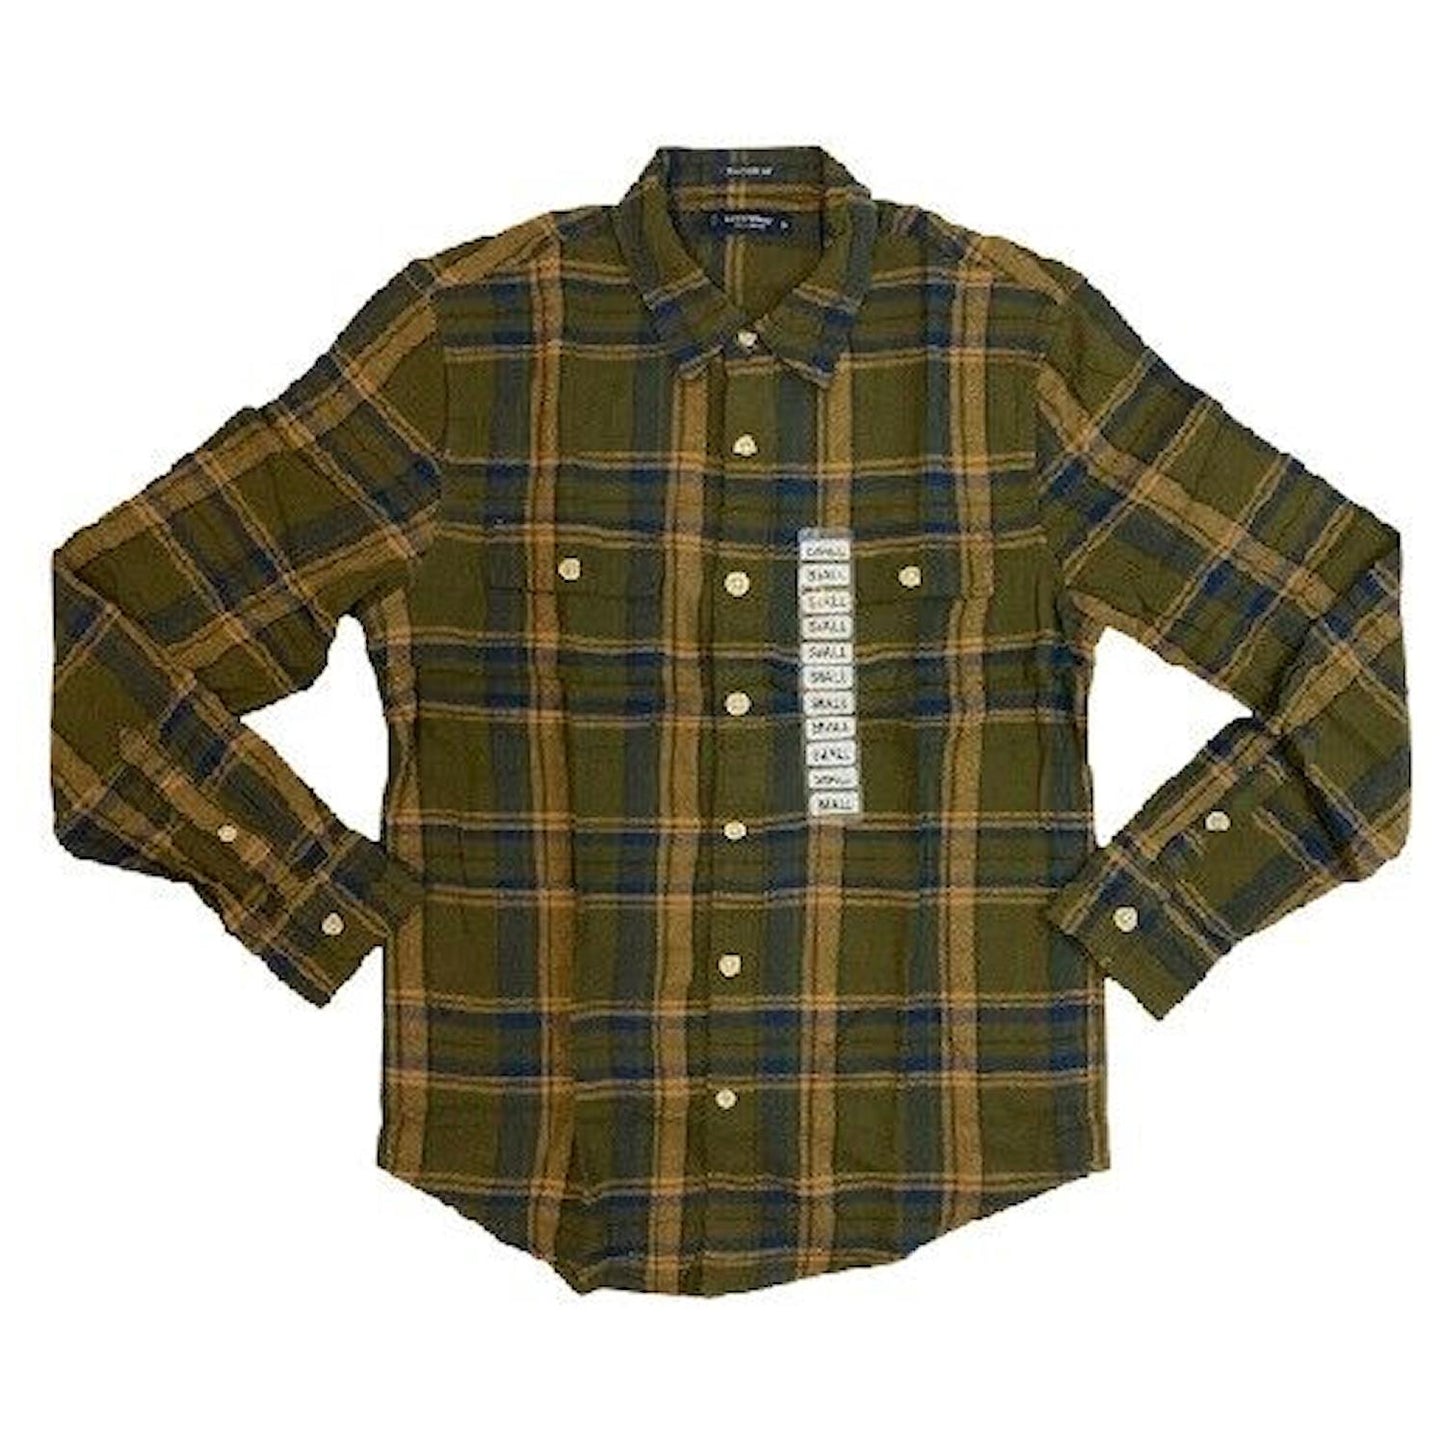 Lucky Brand Men's Humboldt Workwear Flannel Shirt Olive Green Plaid